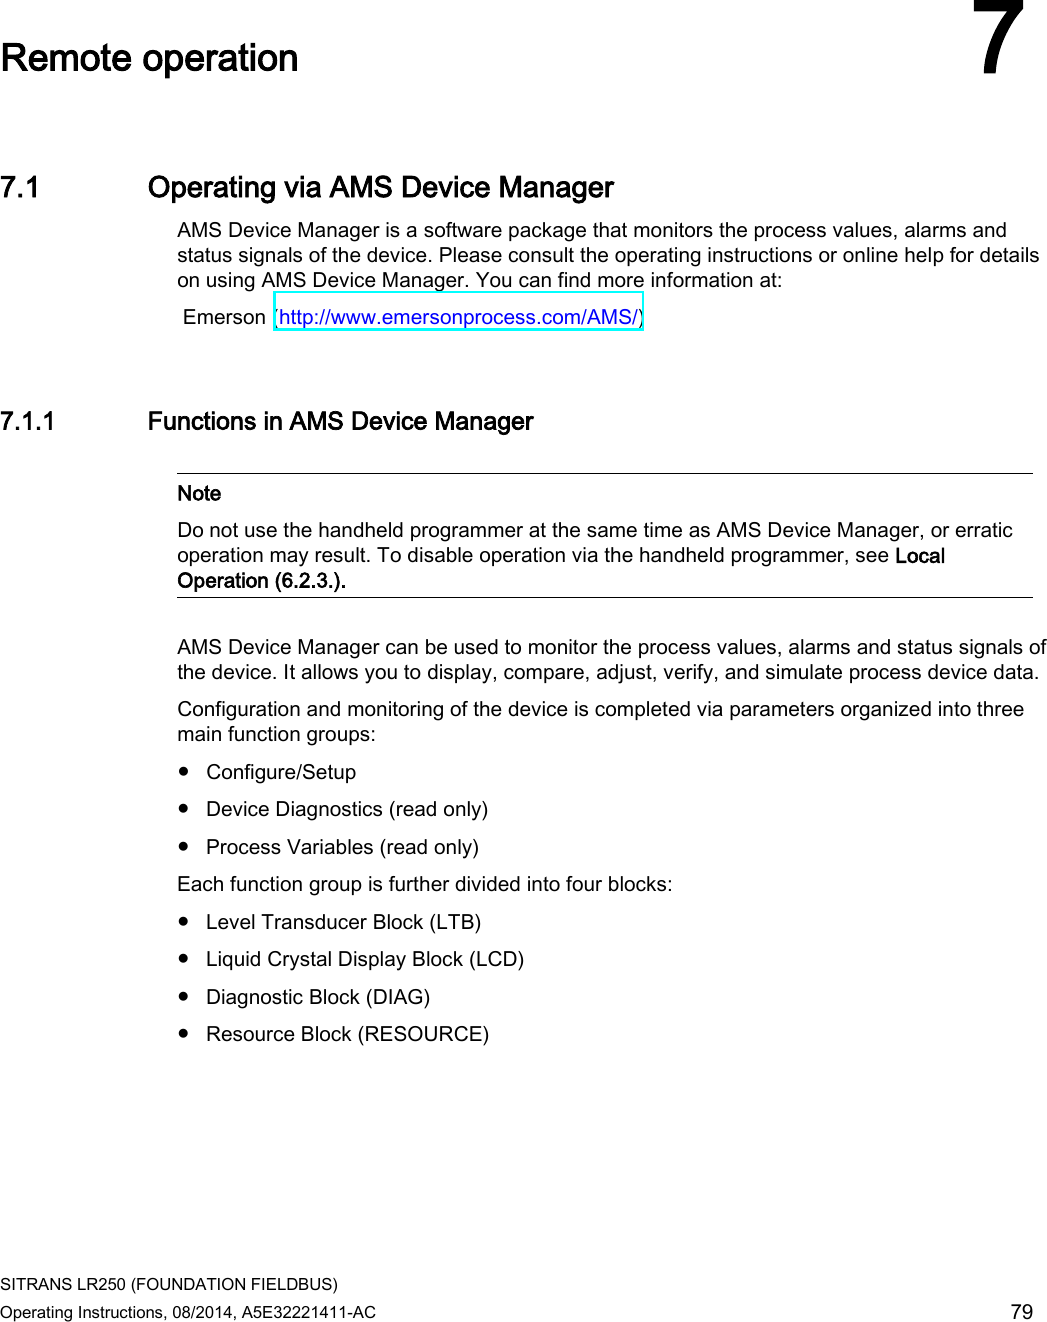  SITRANS LR250 (FOUNDATION FIELDBUS) Operating Instructions, 08/2014, A5E32221411-AC 79  Remote operation 7 7.1 Operating via AMS Device Manager AMS Device Manager is a software package that monitors the process values, alarms and status signals of the device. Please consult the operating instructions or online help for details on using AMS Device Manager. You can find more information at:  Emerson (http://www.emersonprocess.com/AMS/) 7.1.1 Functions in AMS Device Manager   Note Do not use the handheld programmer at the same time as AMS Device Manager, or erratic operation may result. To disable operation via the handheld programmer, see Local Operation (6.2.3.).  AMS Device Manager can be used to monitor the process values, alarms and status signals of the device. It allows you to display, compare, adjust, verify, and simulate process device data. Configuration and monitoring of the device is completed via parameters organized into three main function groups: ● Configure/Setup ● Device Diagnostics (read only) ● Process Variables (read only) Each function group is further divided into four blocks: ● Level Transducer Block (LTB) ● Liquid Crystal Display Block (LCD) ● Diagnostic Block (DIAG) ● Resource Block (RESOURCE) 